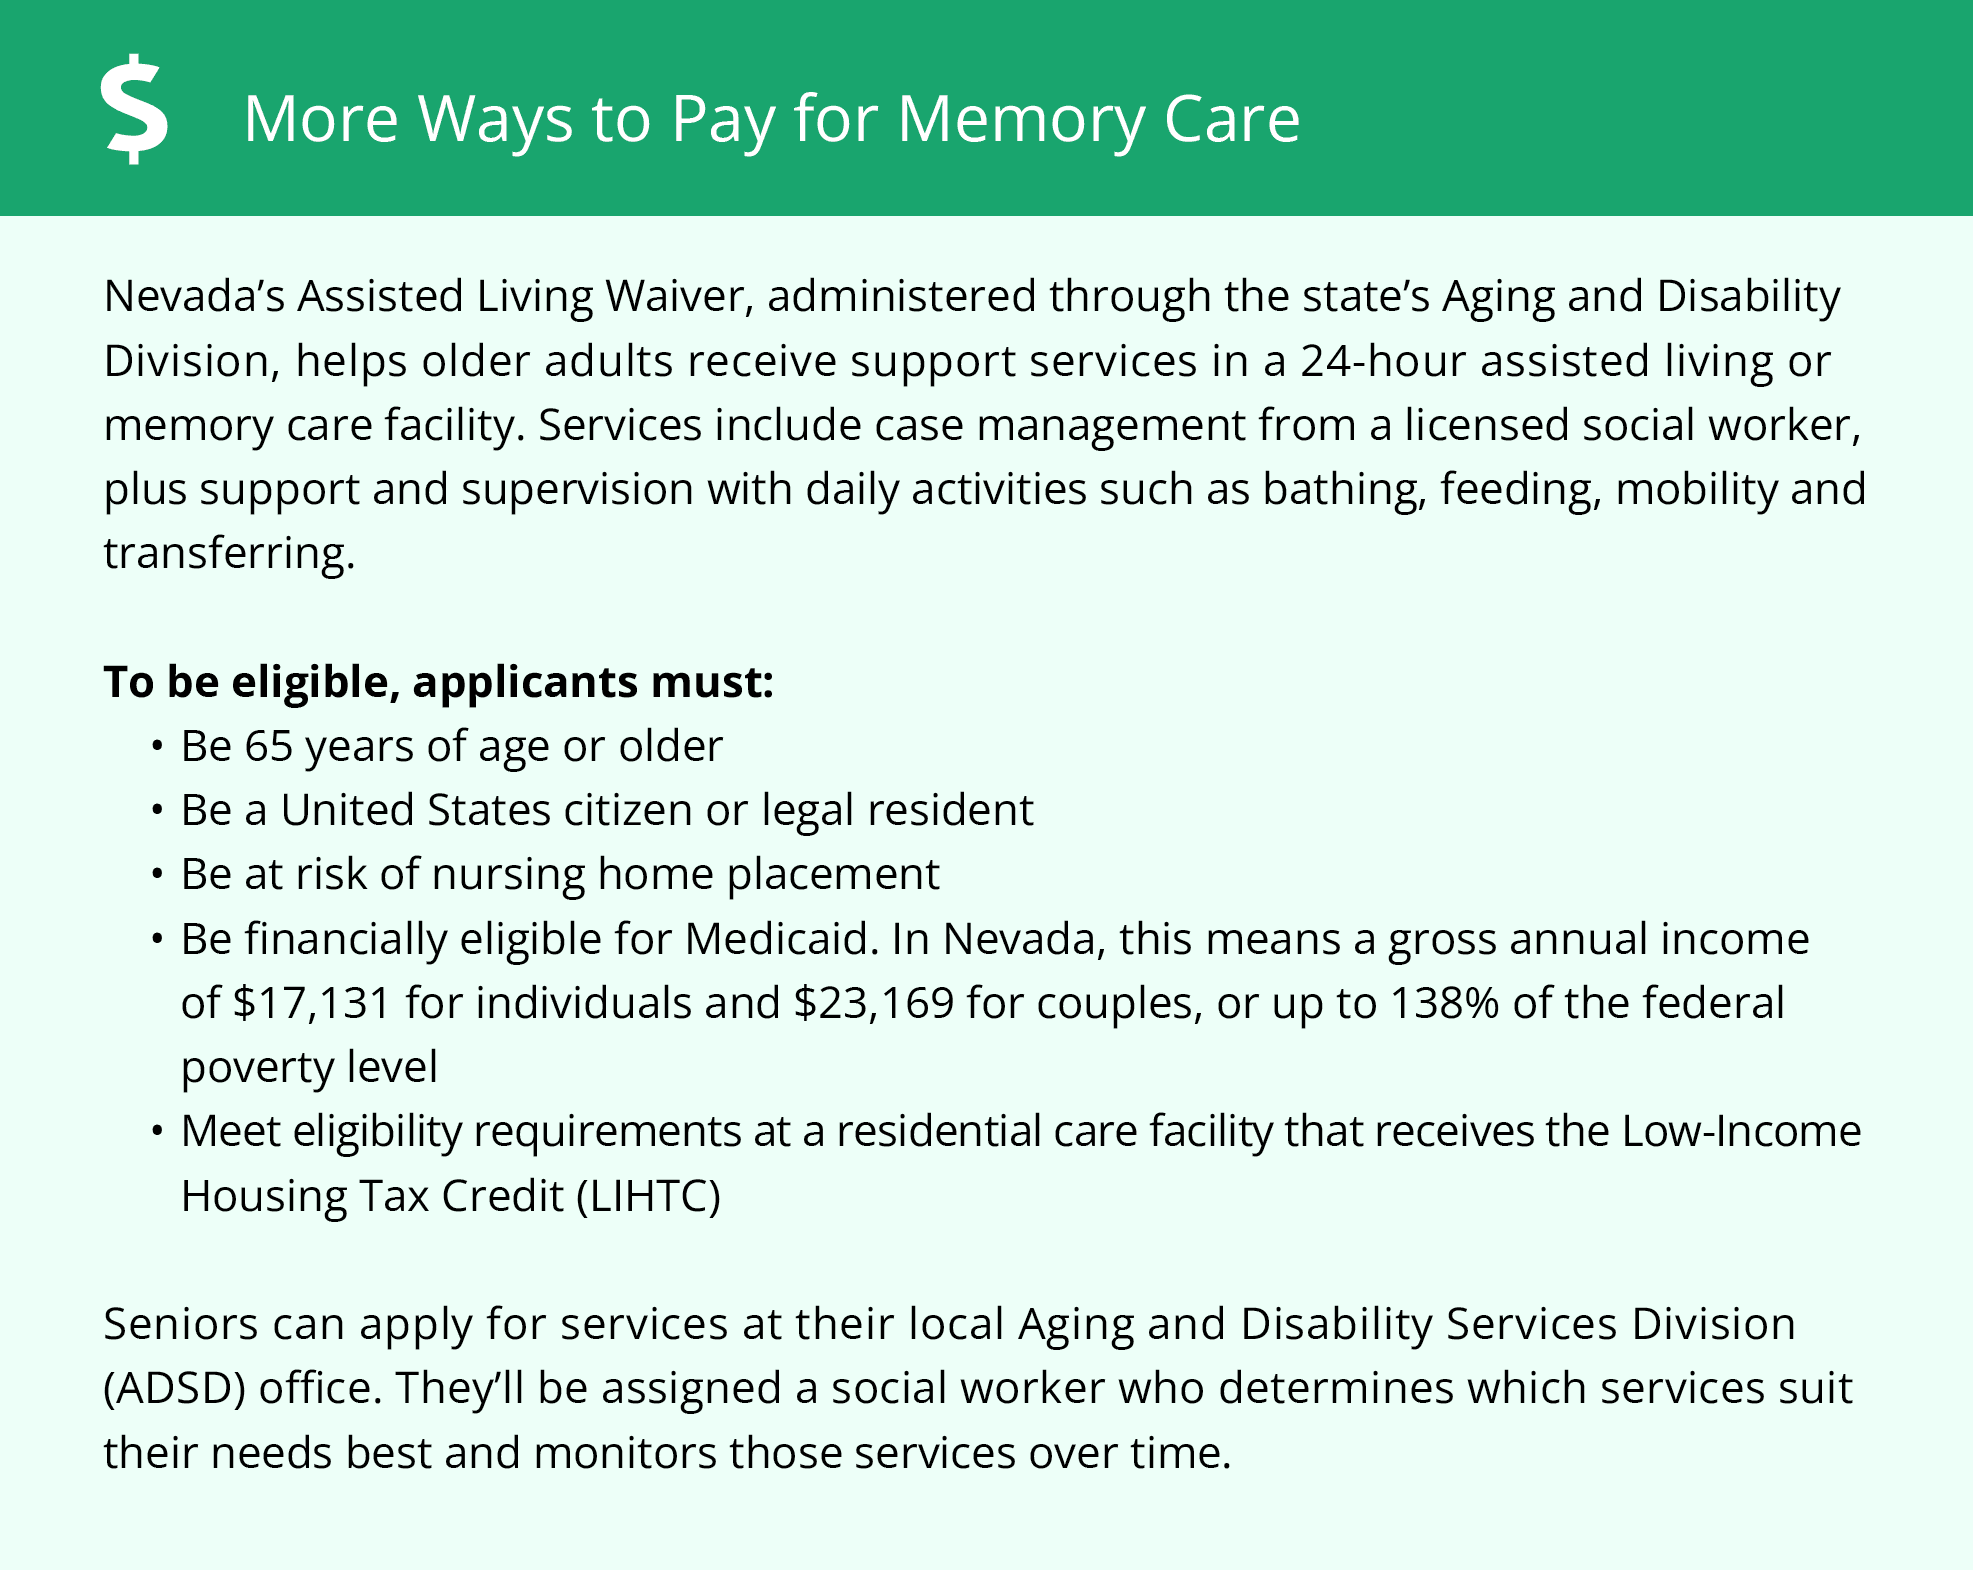 More ways to pay for memory care in NV